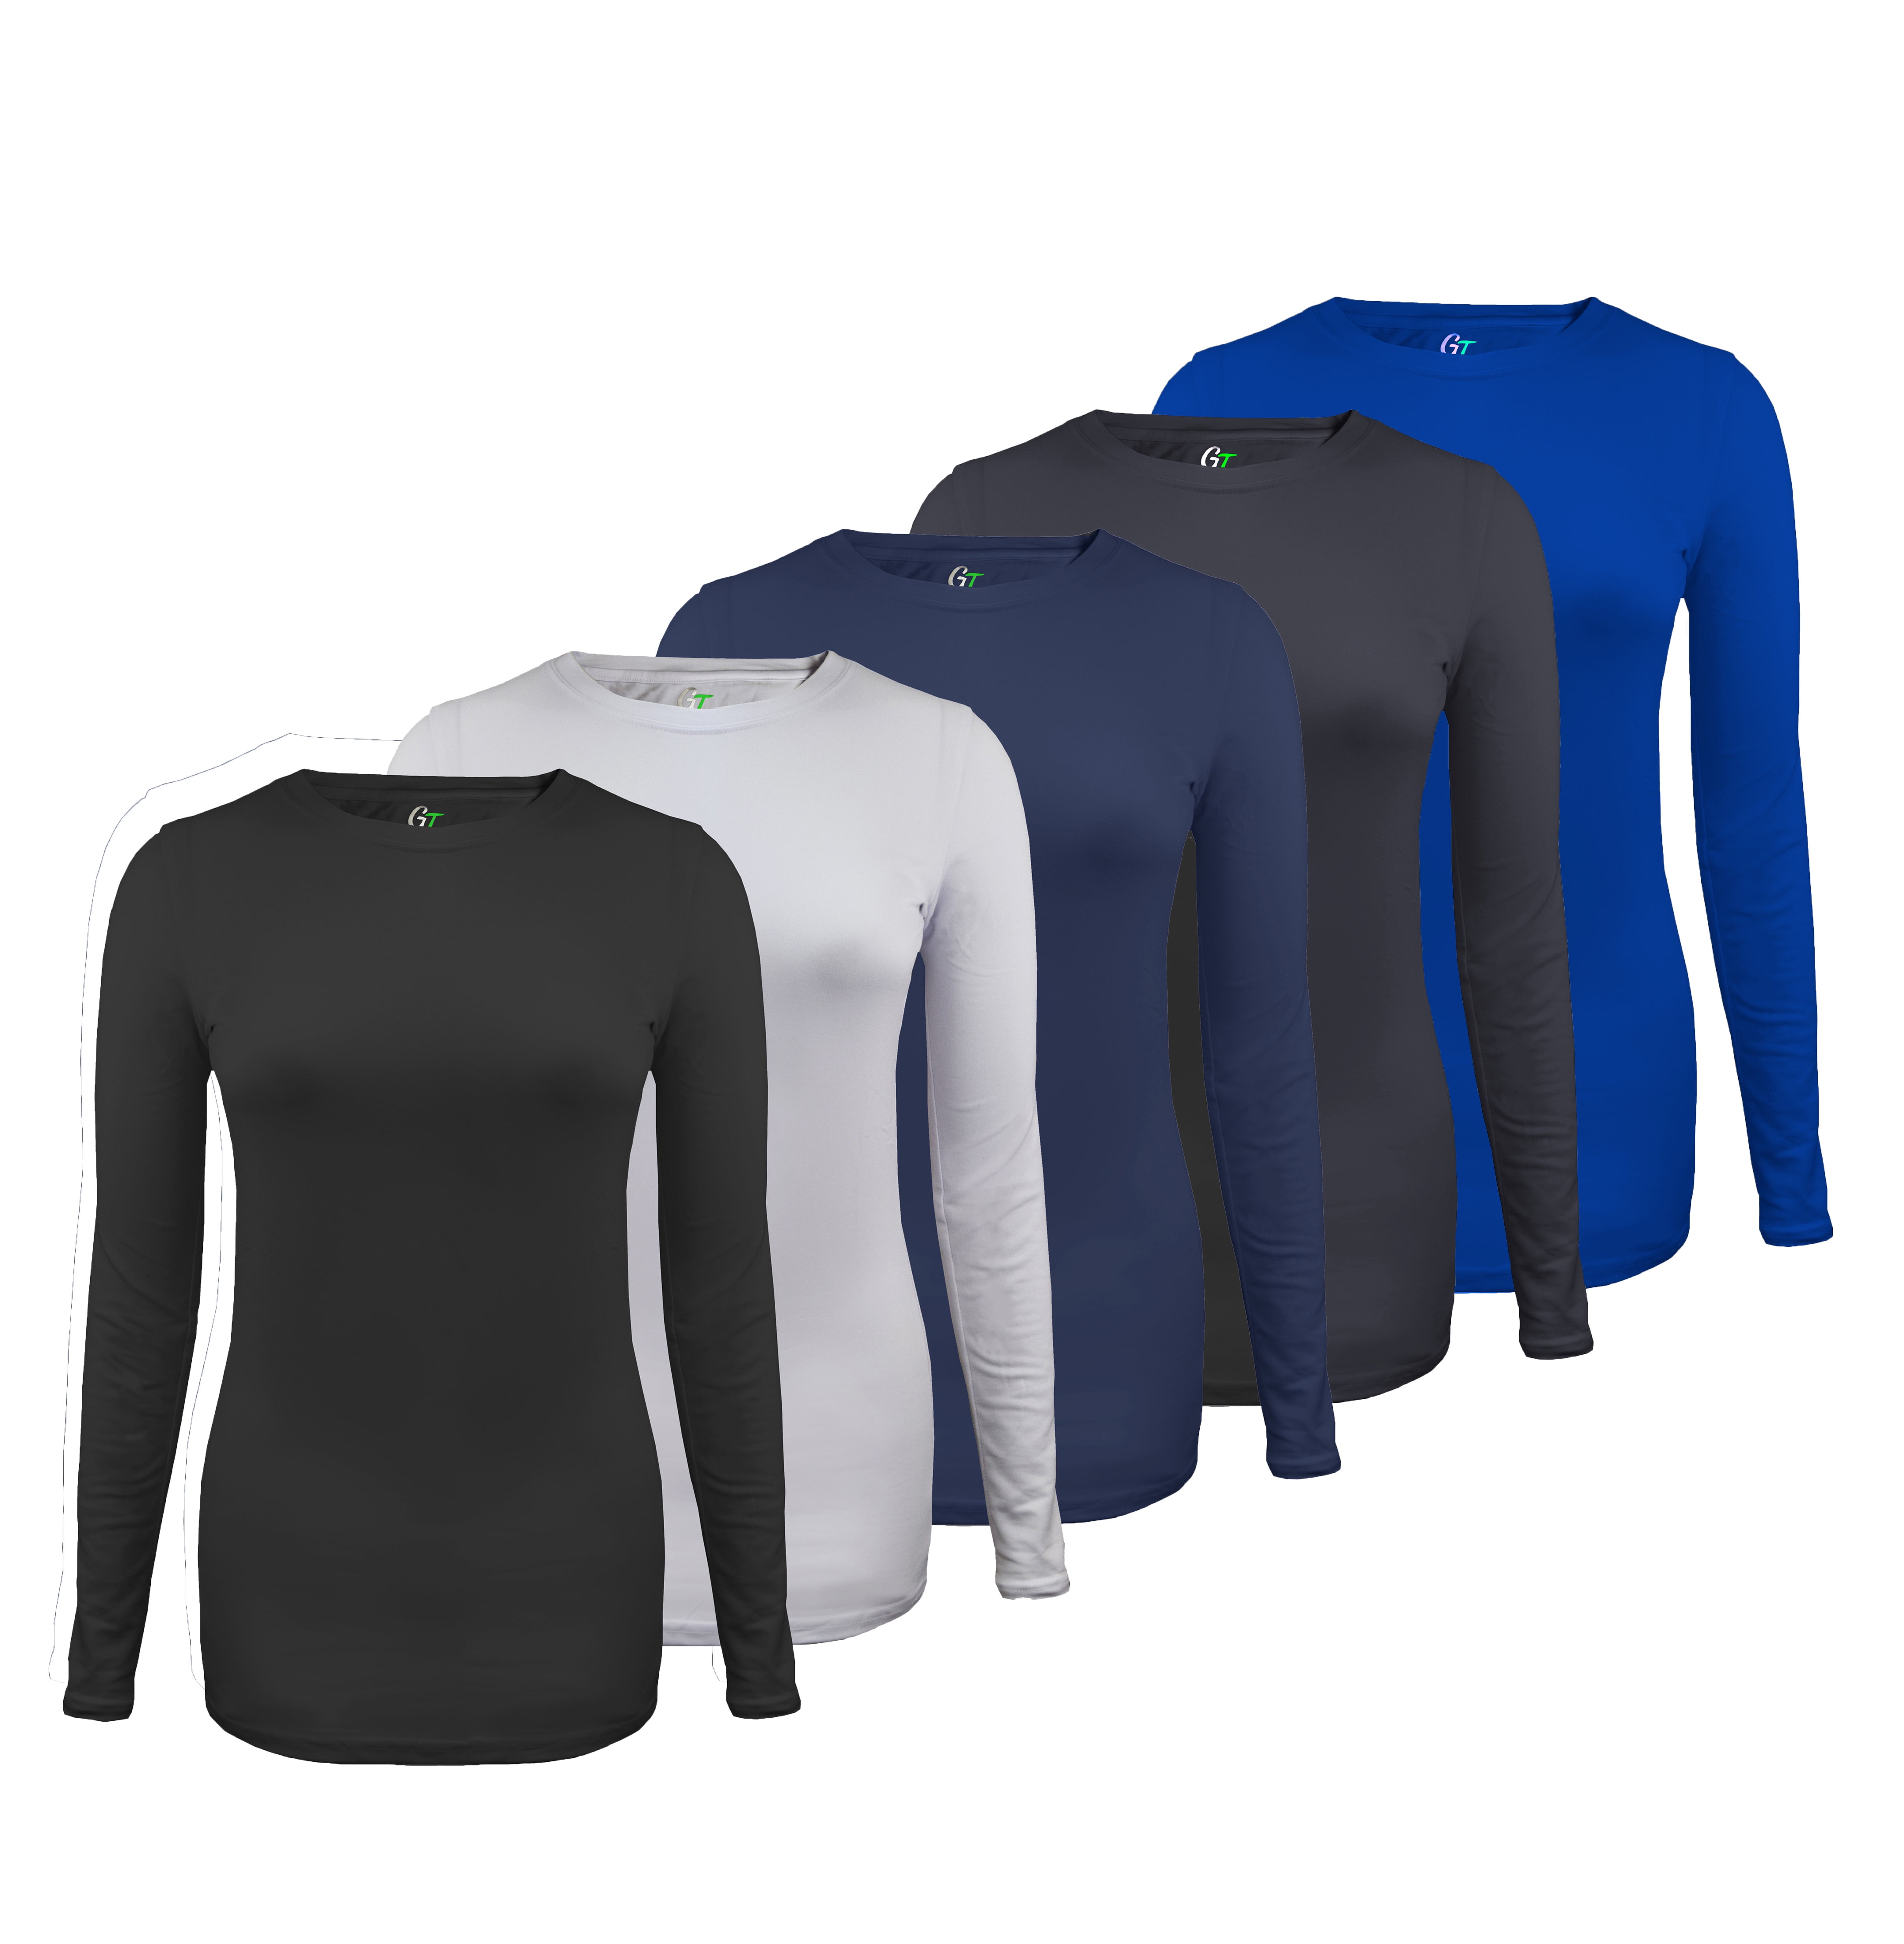 2-PACK 3-PACK 4-PACK 5-PACK Womens Comfort Long Sleeve T-Shirt